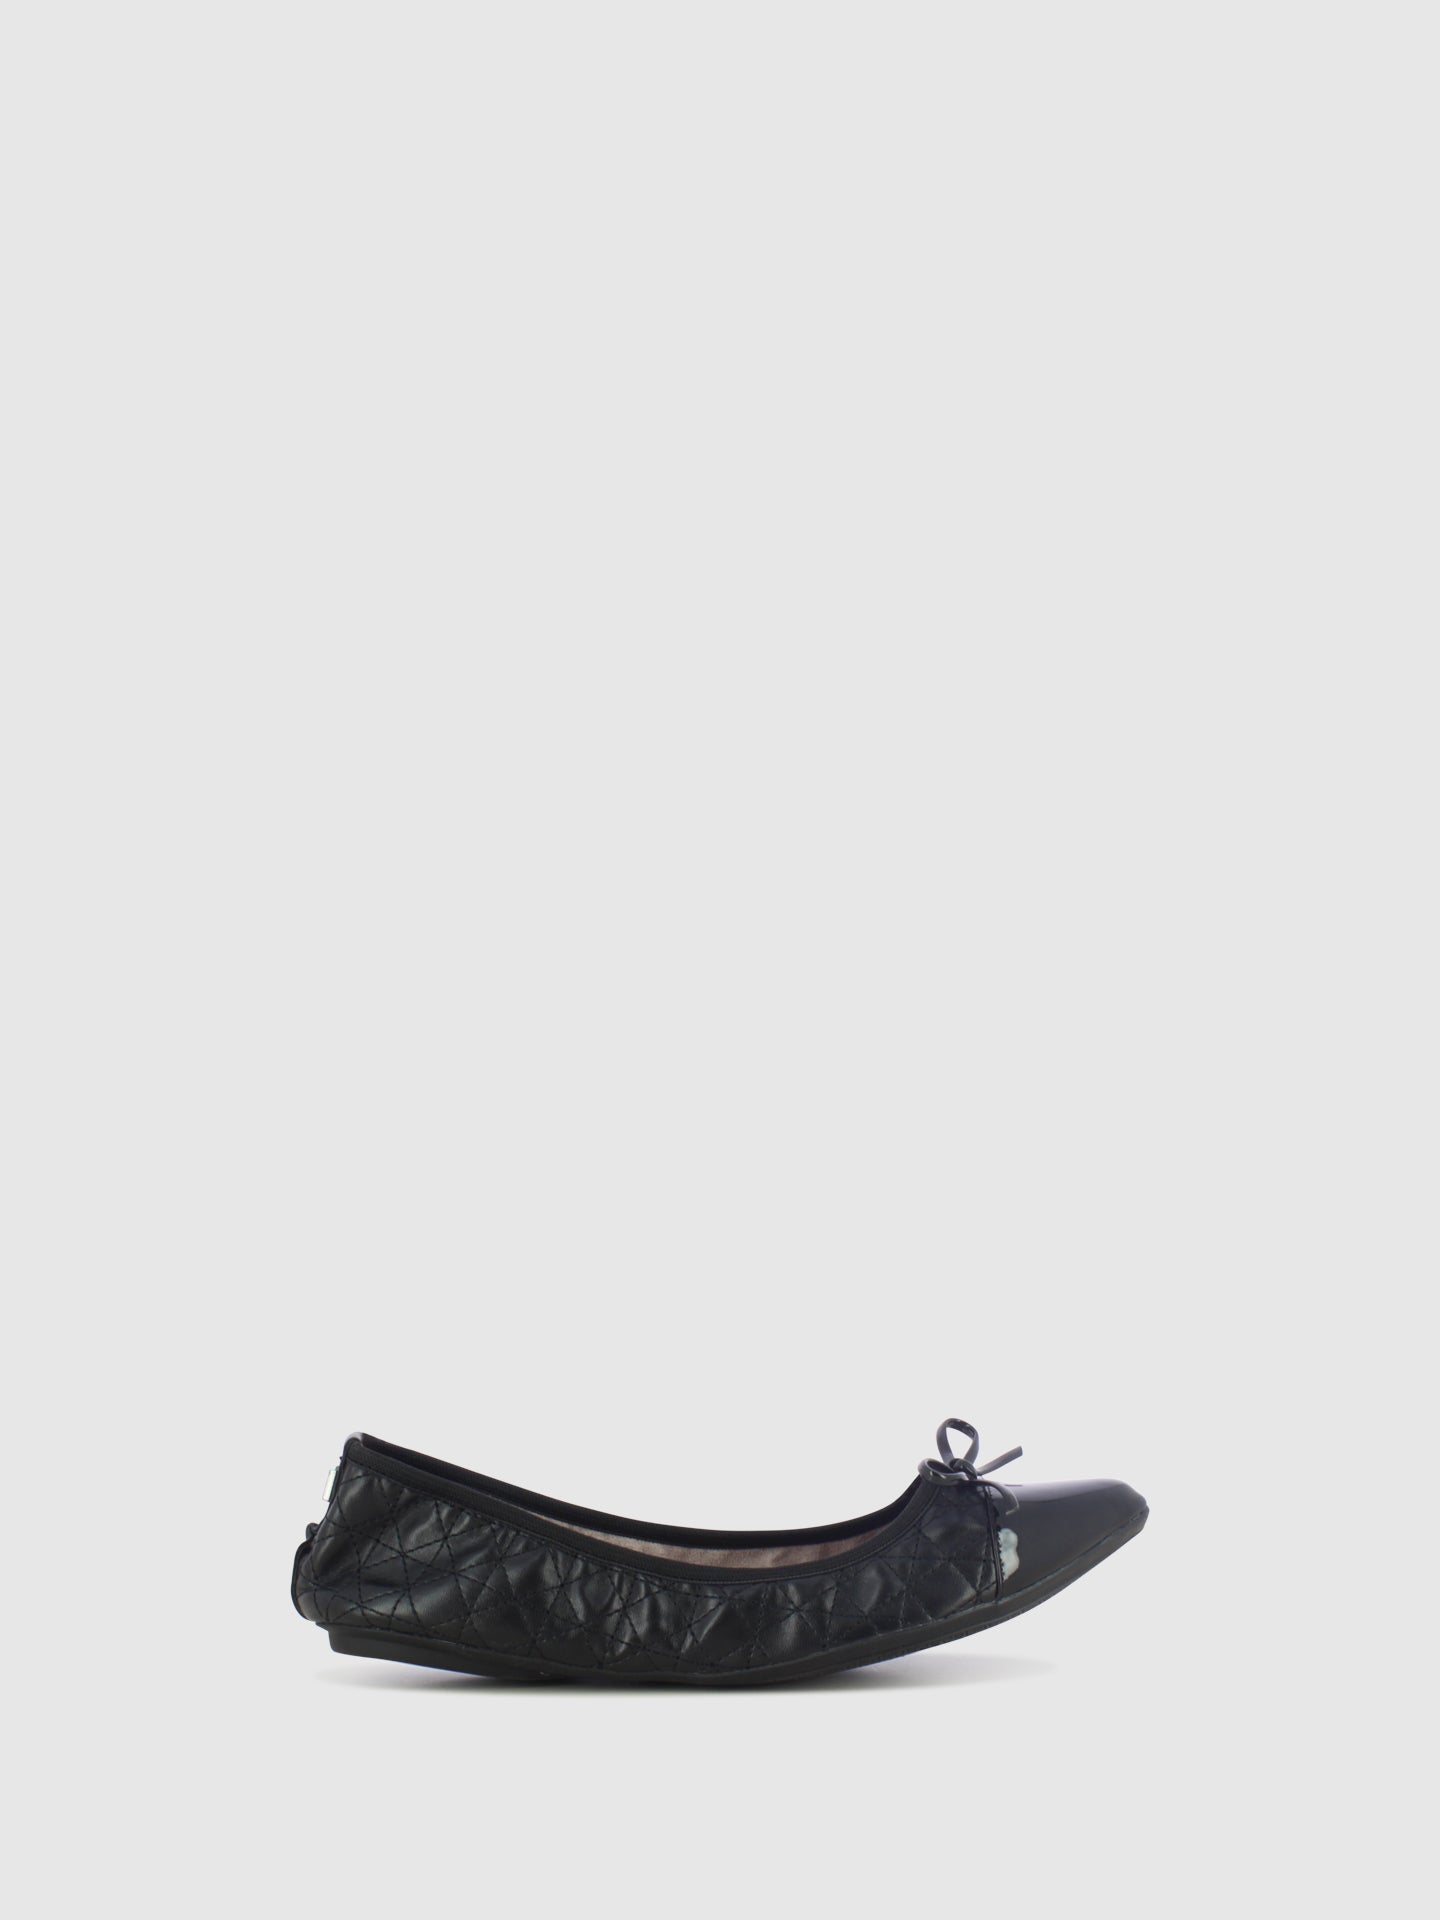 Butterfly Twists Black Pointed Toe Ballerinas